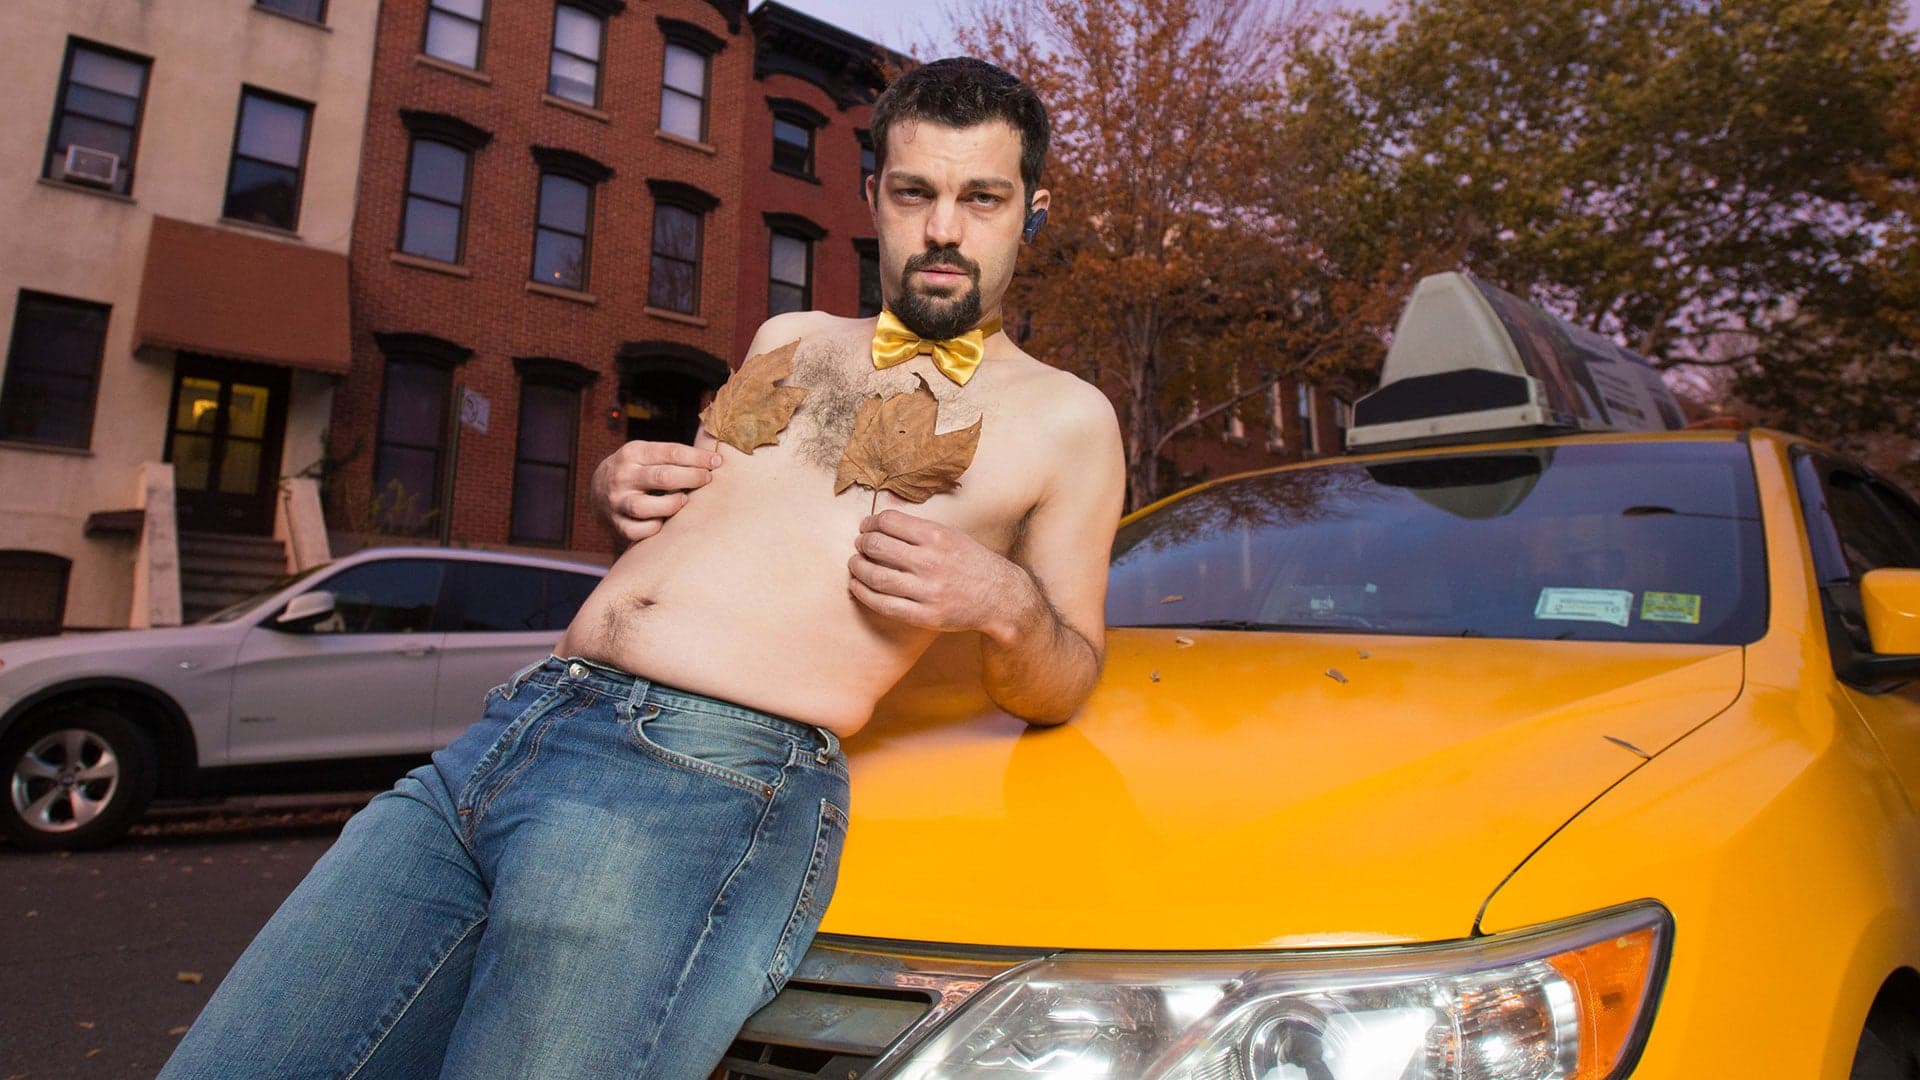 NYC Taxi Driver Calendar: Because “Cabbie Bod” Is the New “Dad Bod”